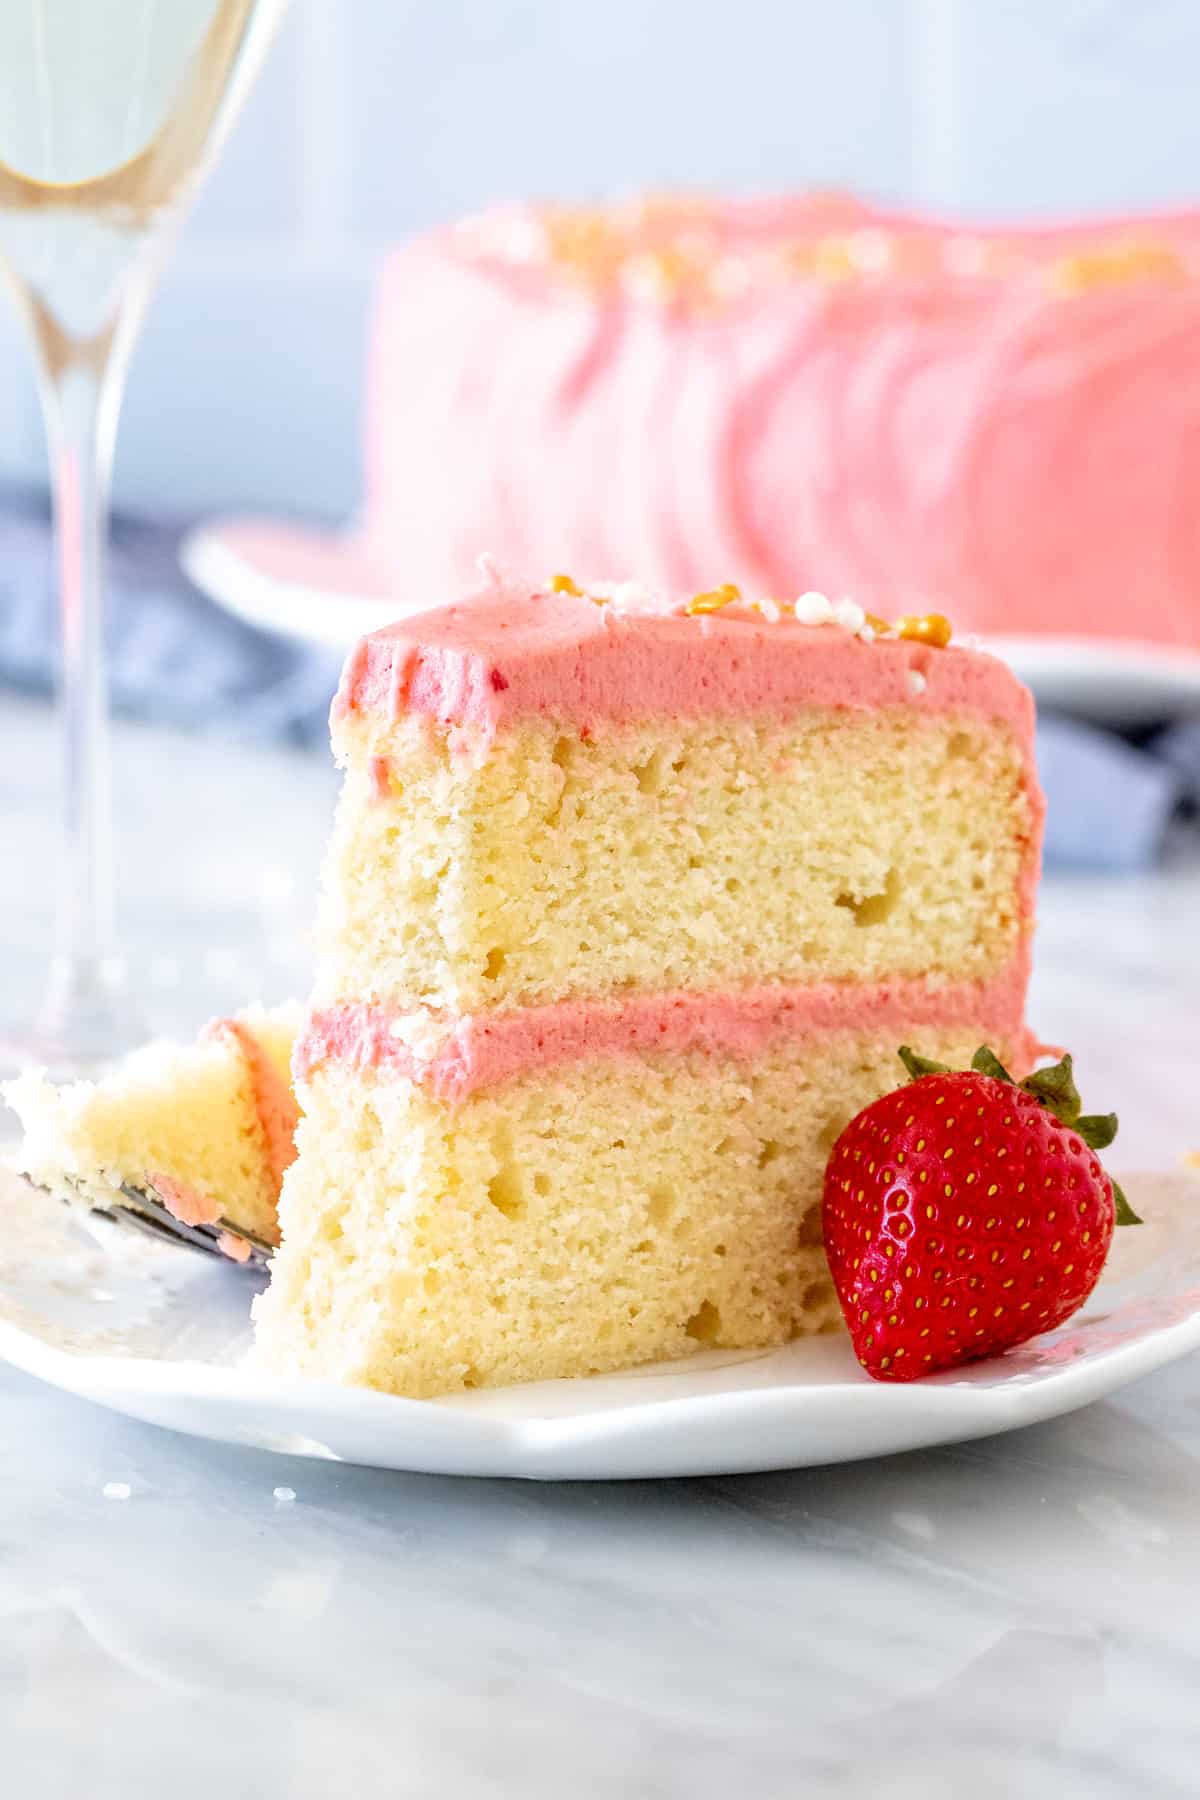 Slice of cake with pink strawberry frosting